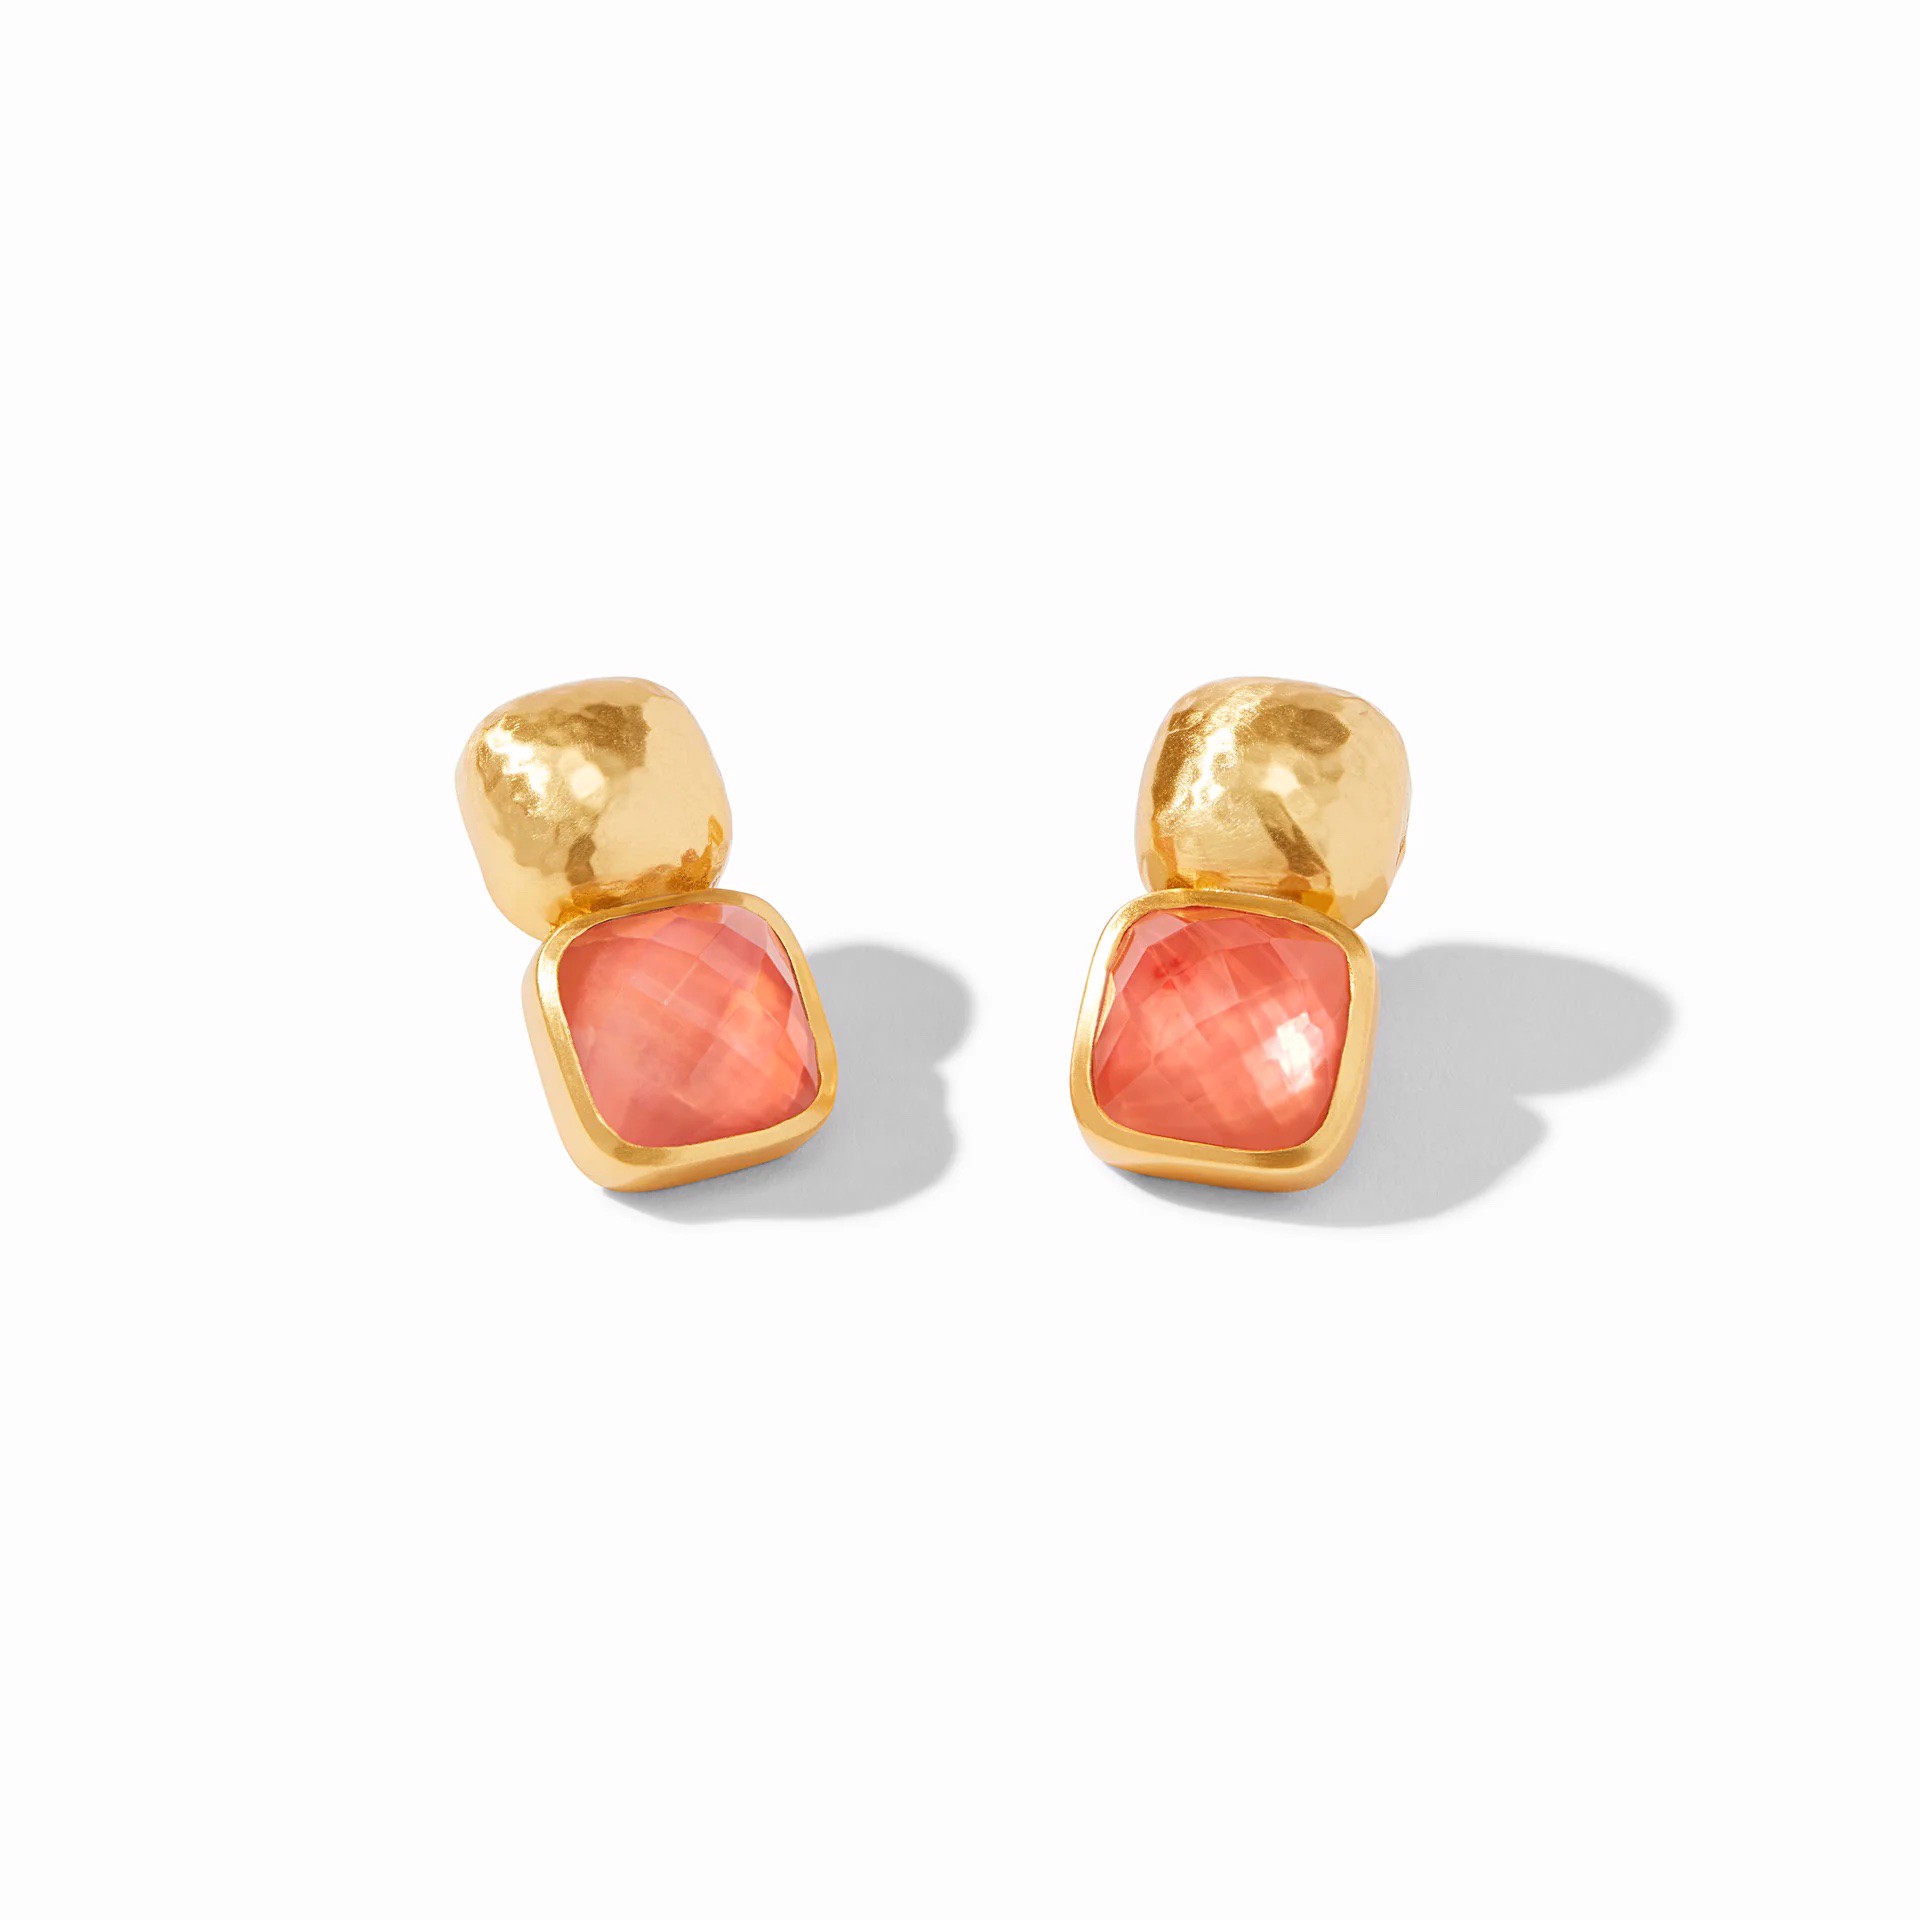 Catalina Earring - Coral by Julie Vos